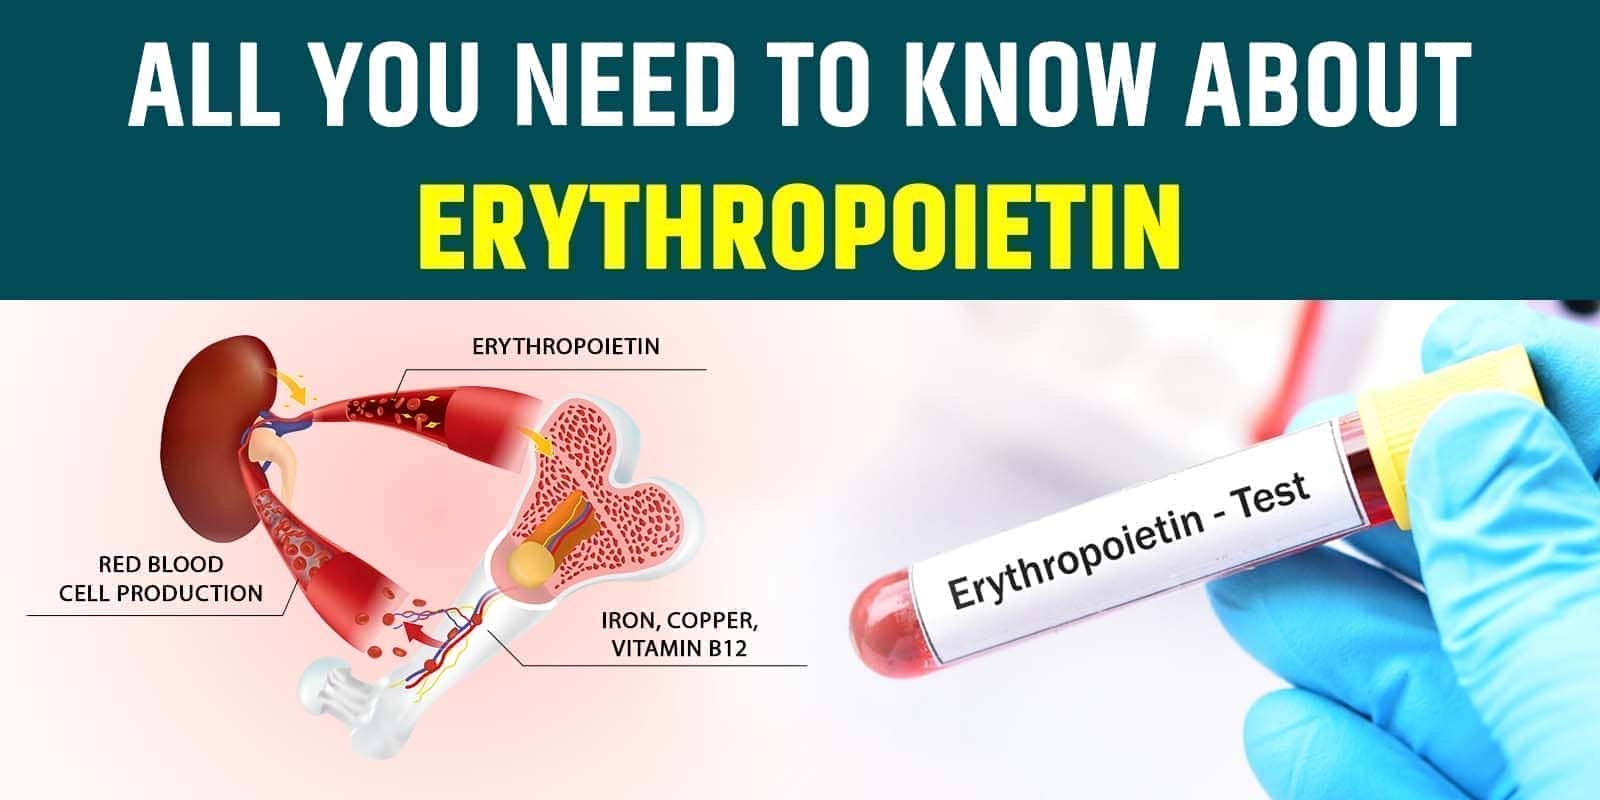 All You Need to Know About Erythropoietin